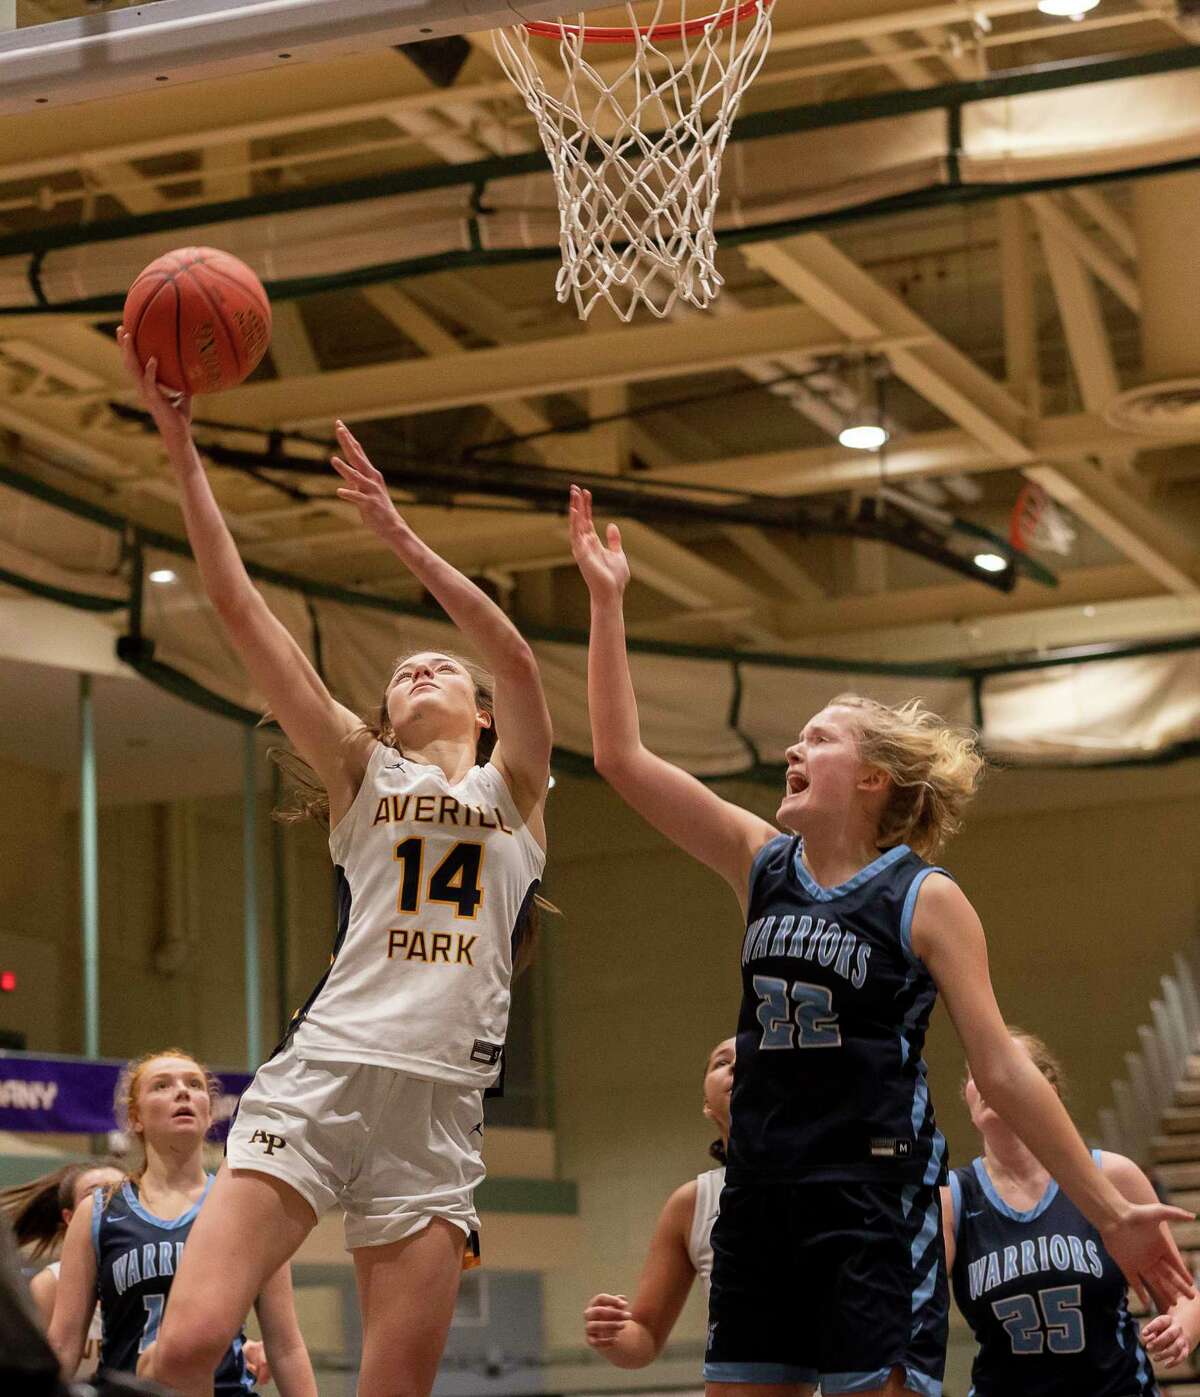 Averill Park’s Taylor Holohan shoots the ball as Indian River’s Allison LaMora defends during the Class A state quarterfinal at McDonough Sports Complex in Troy, N.Y. on Saturday, Mar. 11, 2023. (Jenn March, Special to the Times Union)